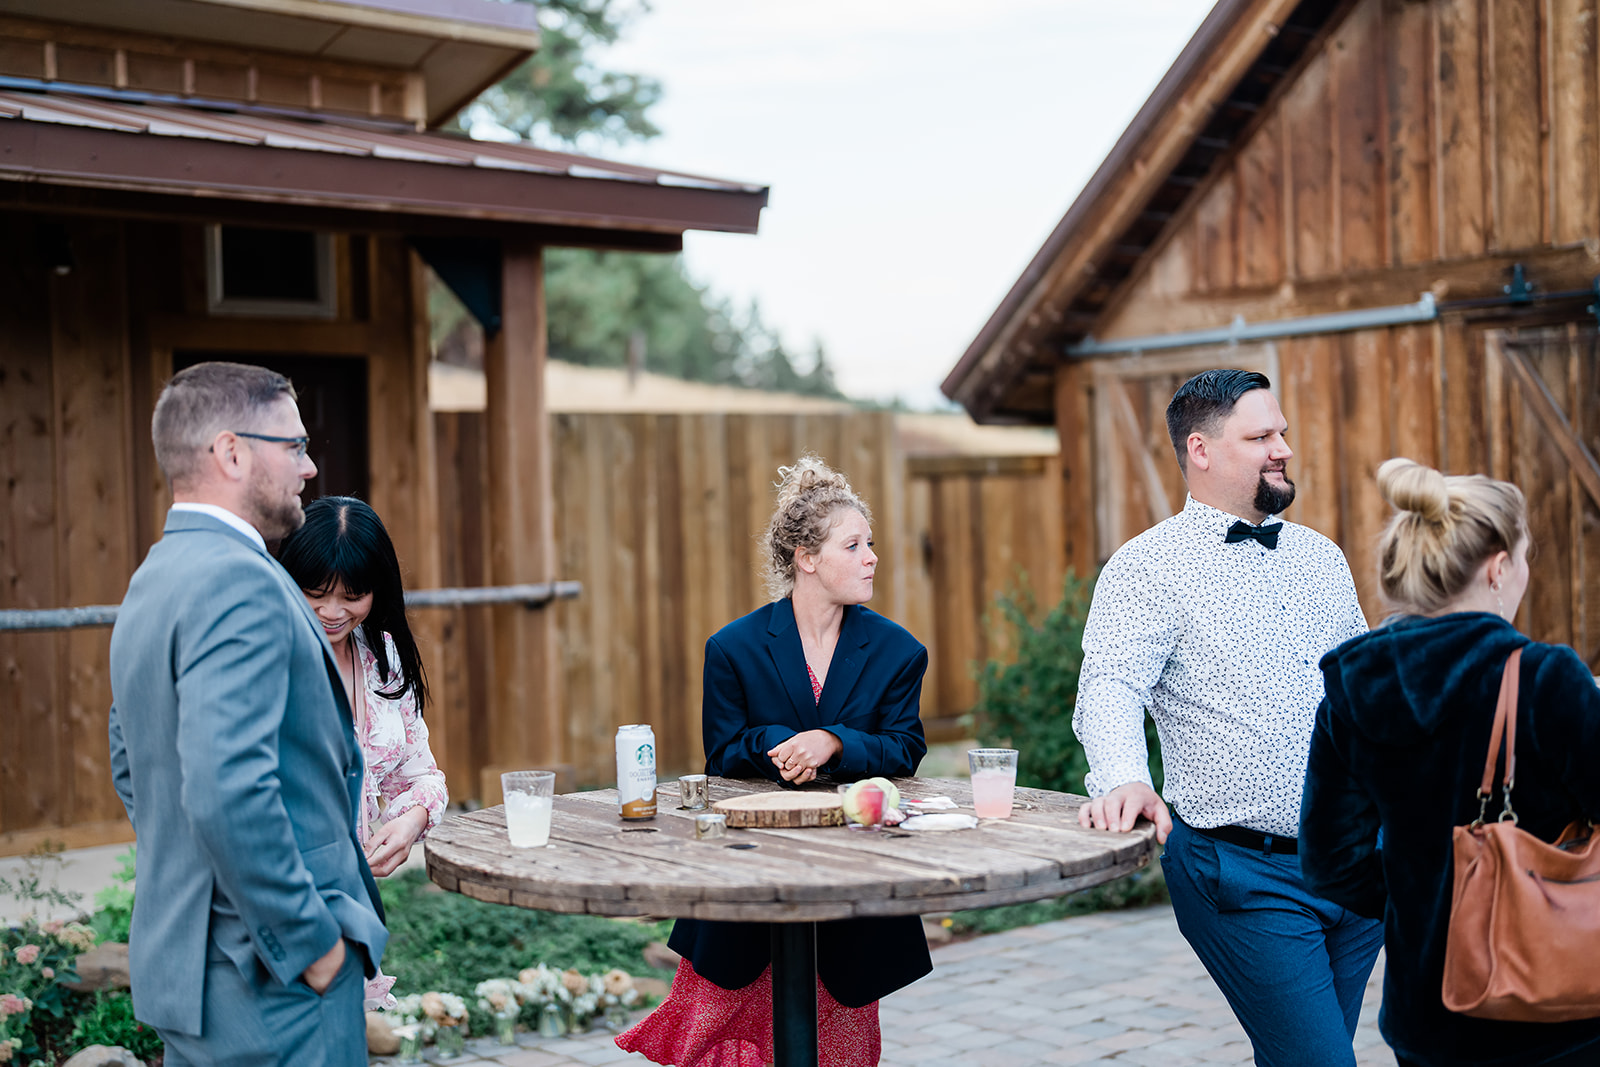 Guests dining at a Cattle Barn Wedding